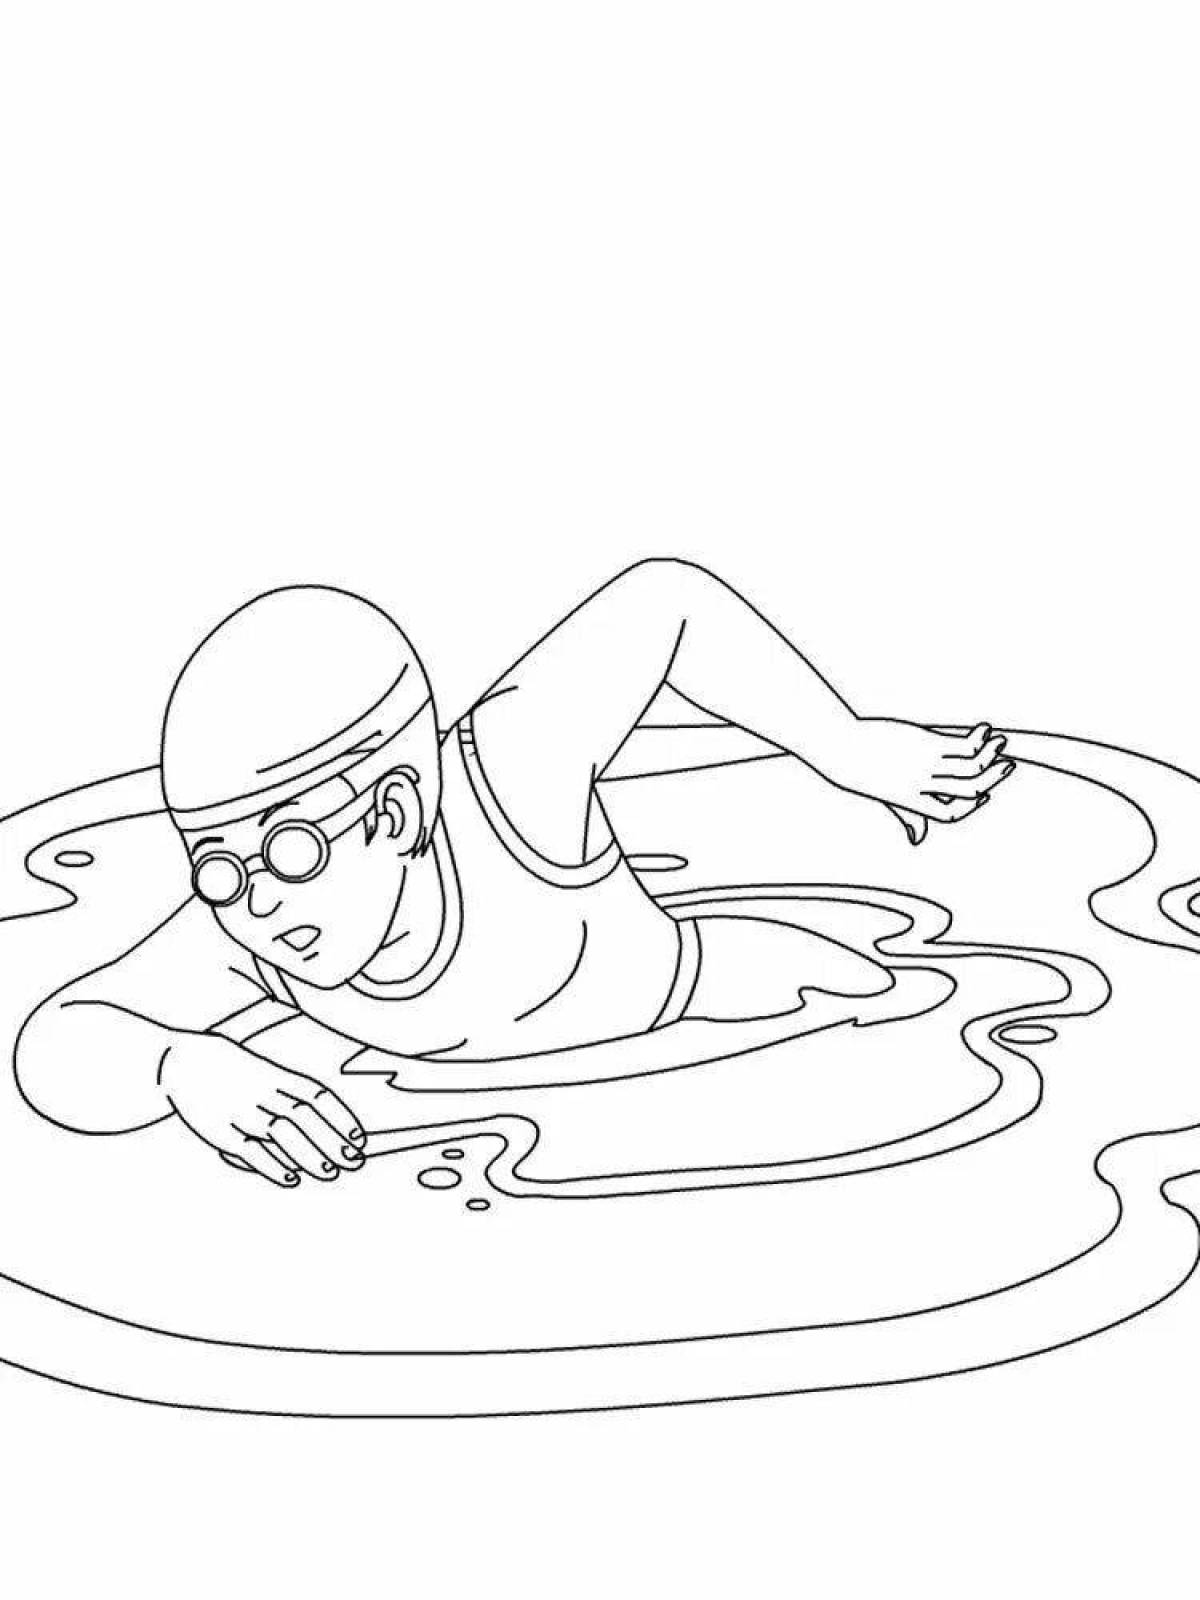 Playful swimming coloring page